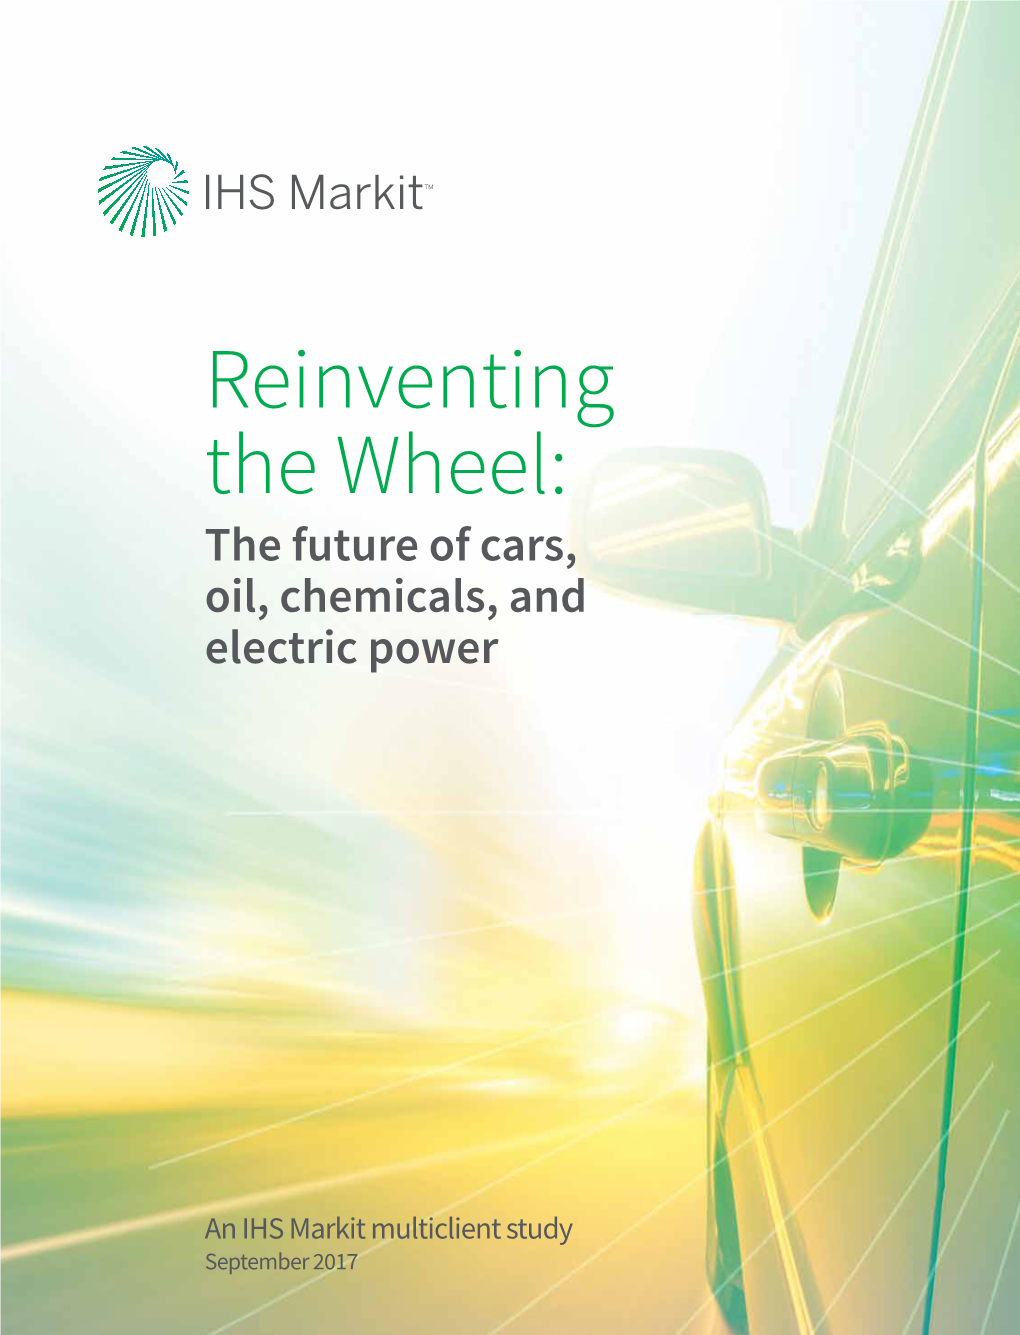 Reinventing the Wheel: the Future of Cars, Oil, Chemicals, and Electric Power